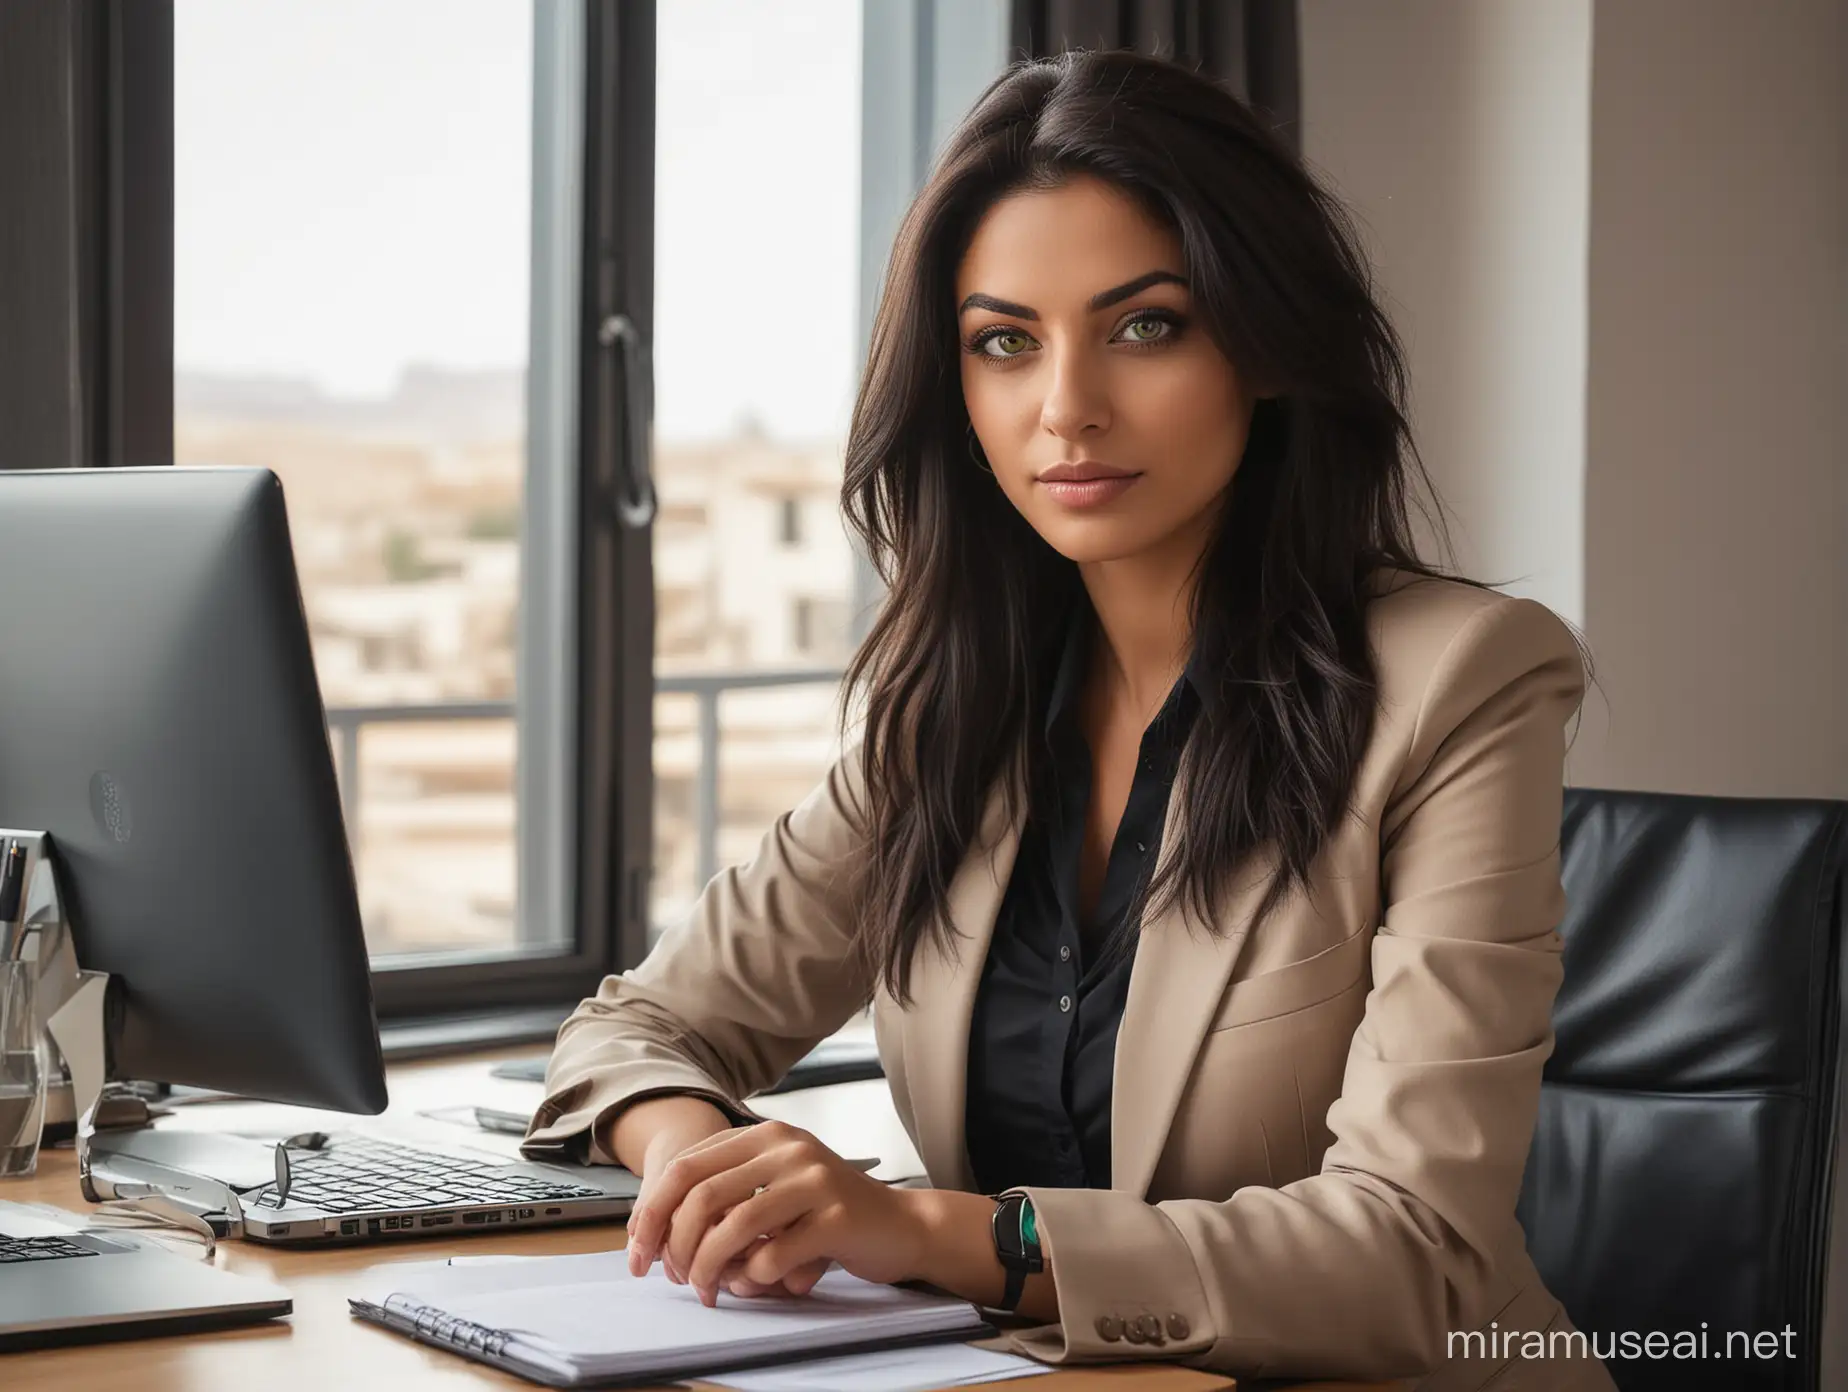 real photo, realism, only one brunette woman with emerald green eyes and black long hair, dark brown skin like the desert, arabic egyptian, 35 years old, office work clothes with a office jacket, working at one desk at home with one laptop, long hair, near the window, desk, home, modern living, sexy, sitting in an office chair